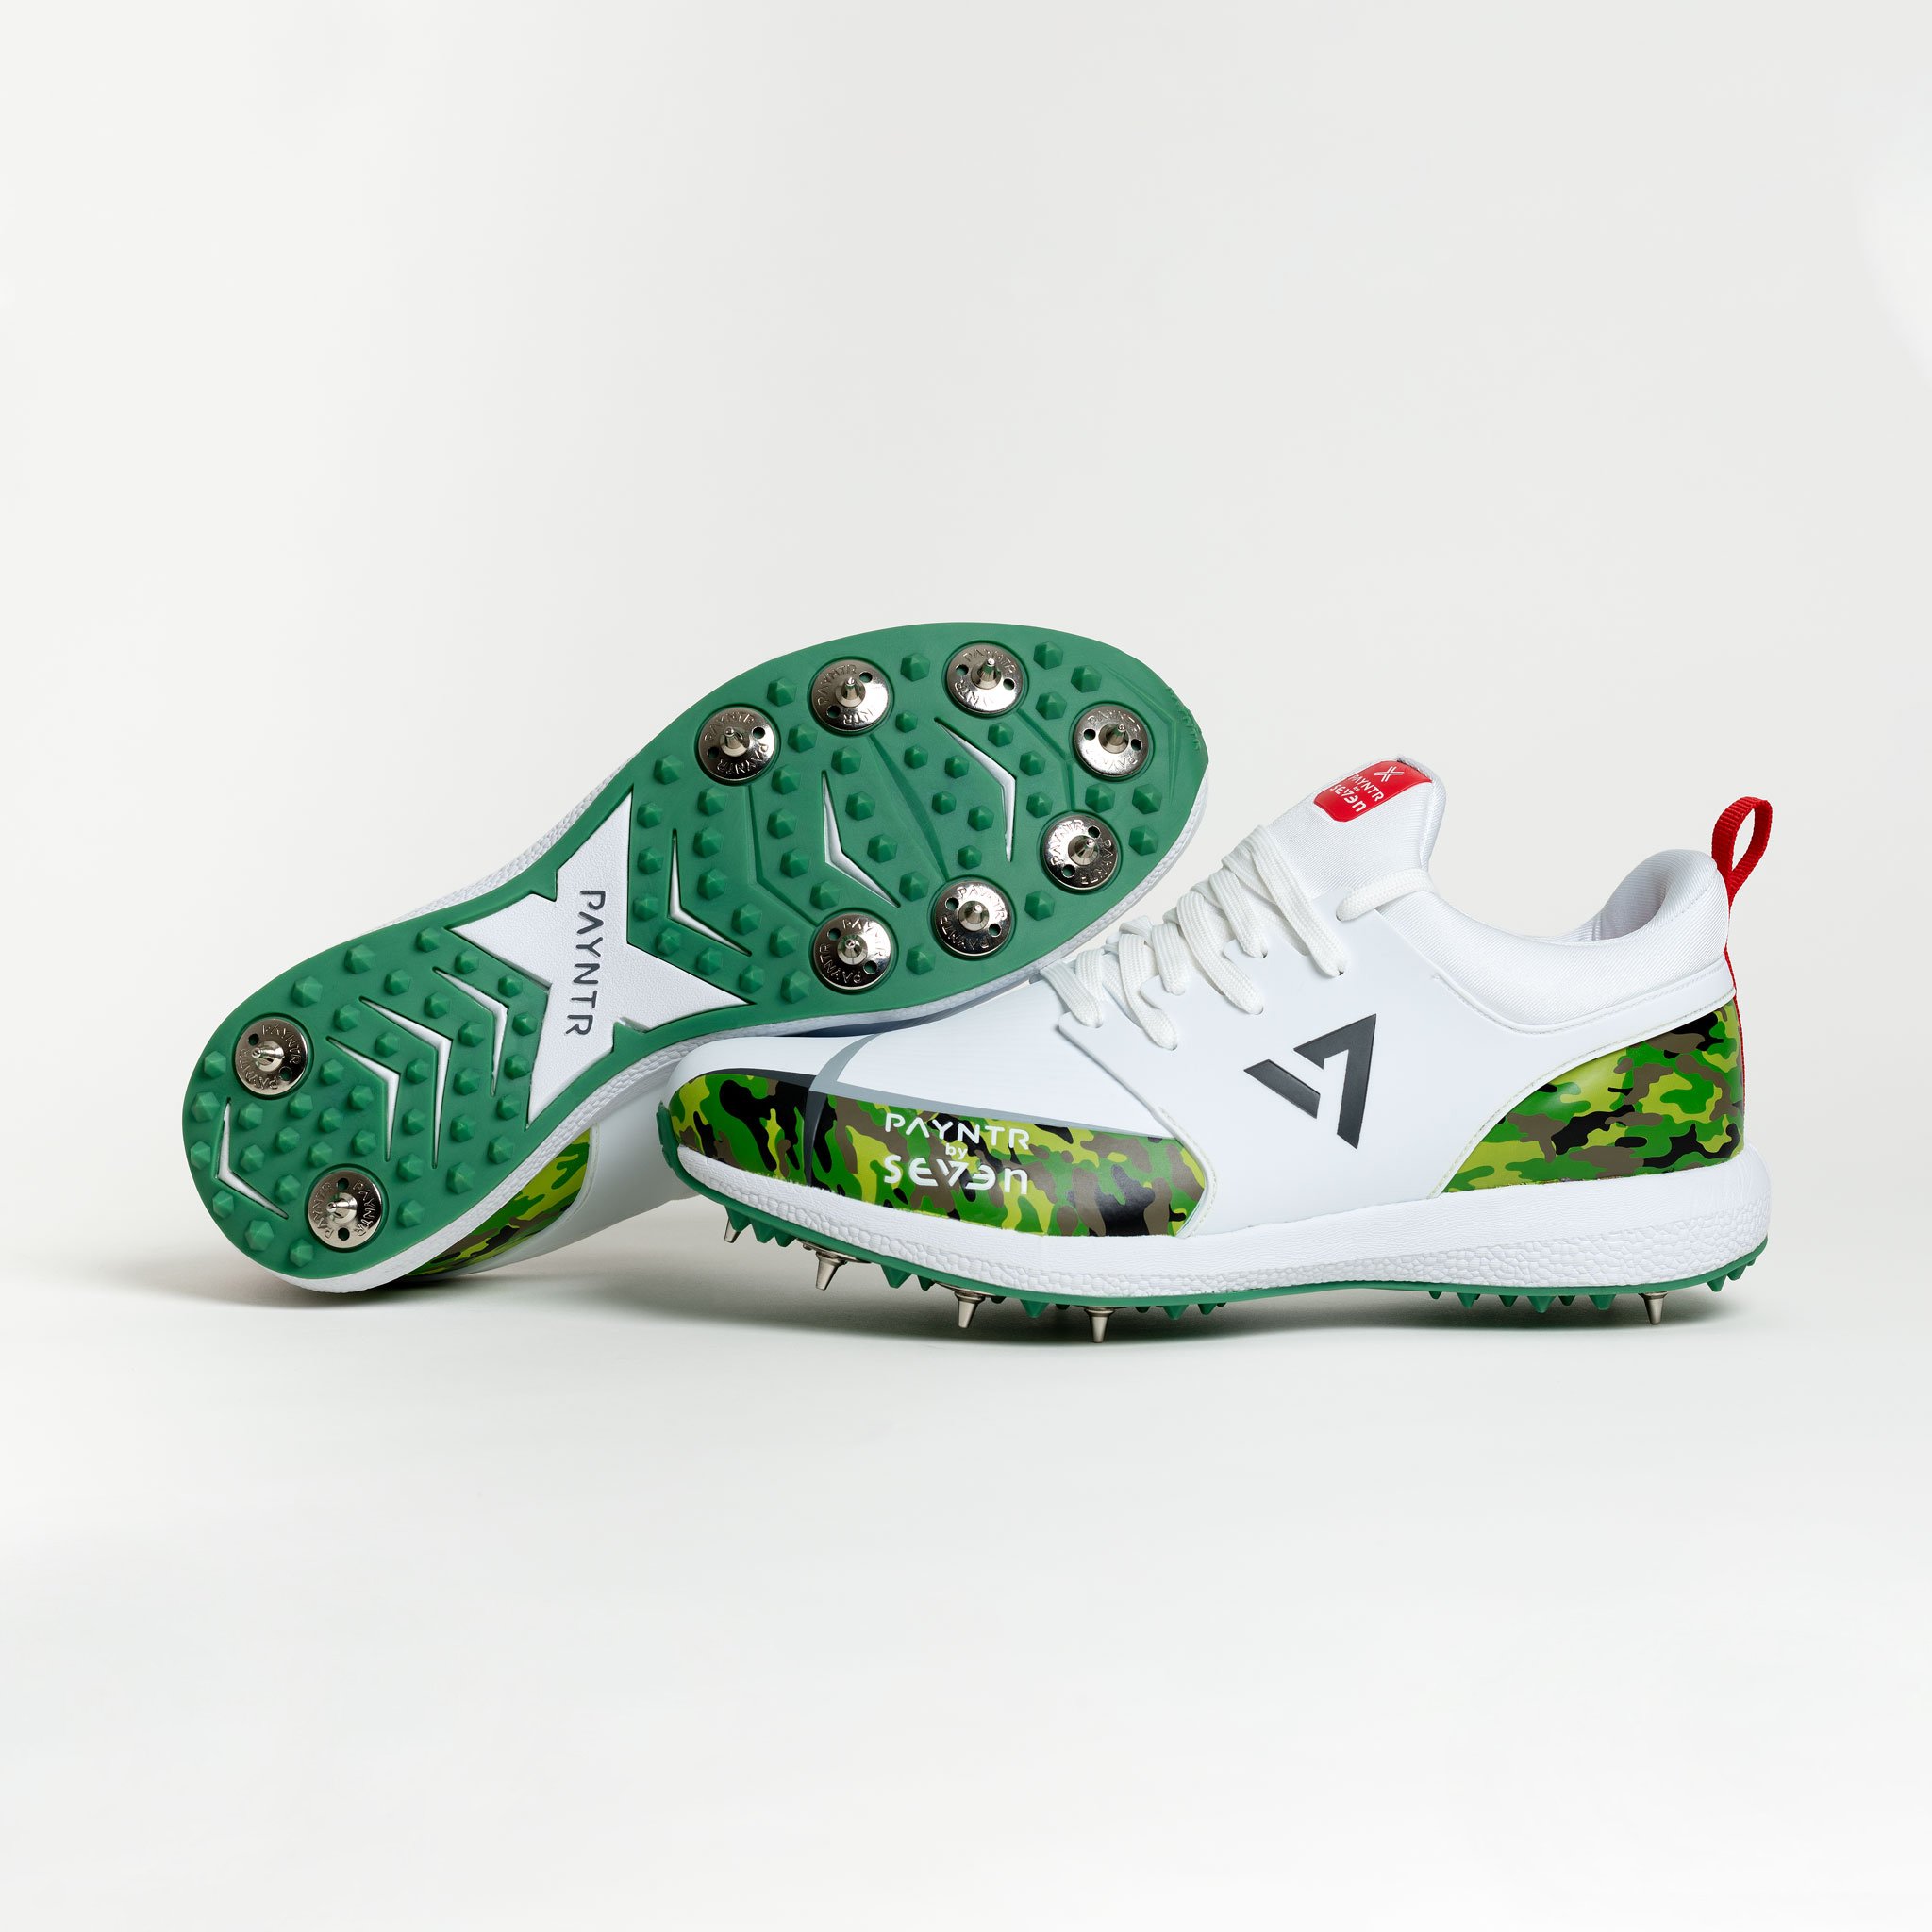 PAYNTR BY 7 CRICKET SPIKES SHOES-CAMO 